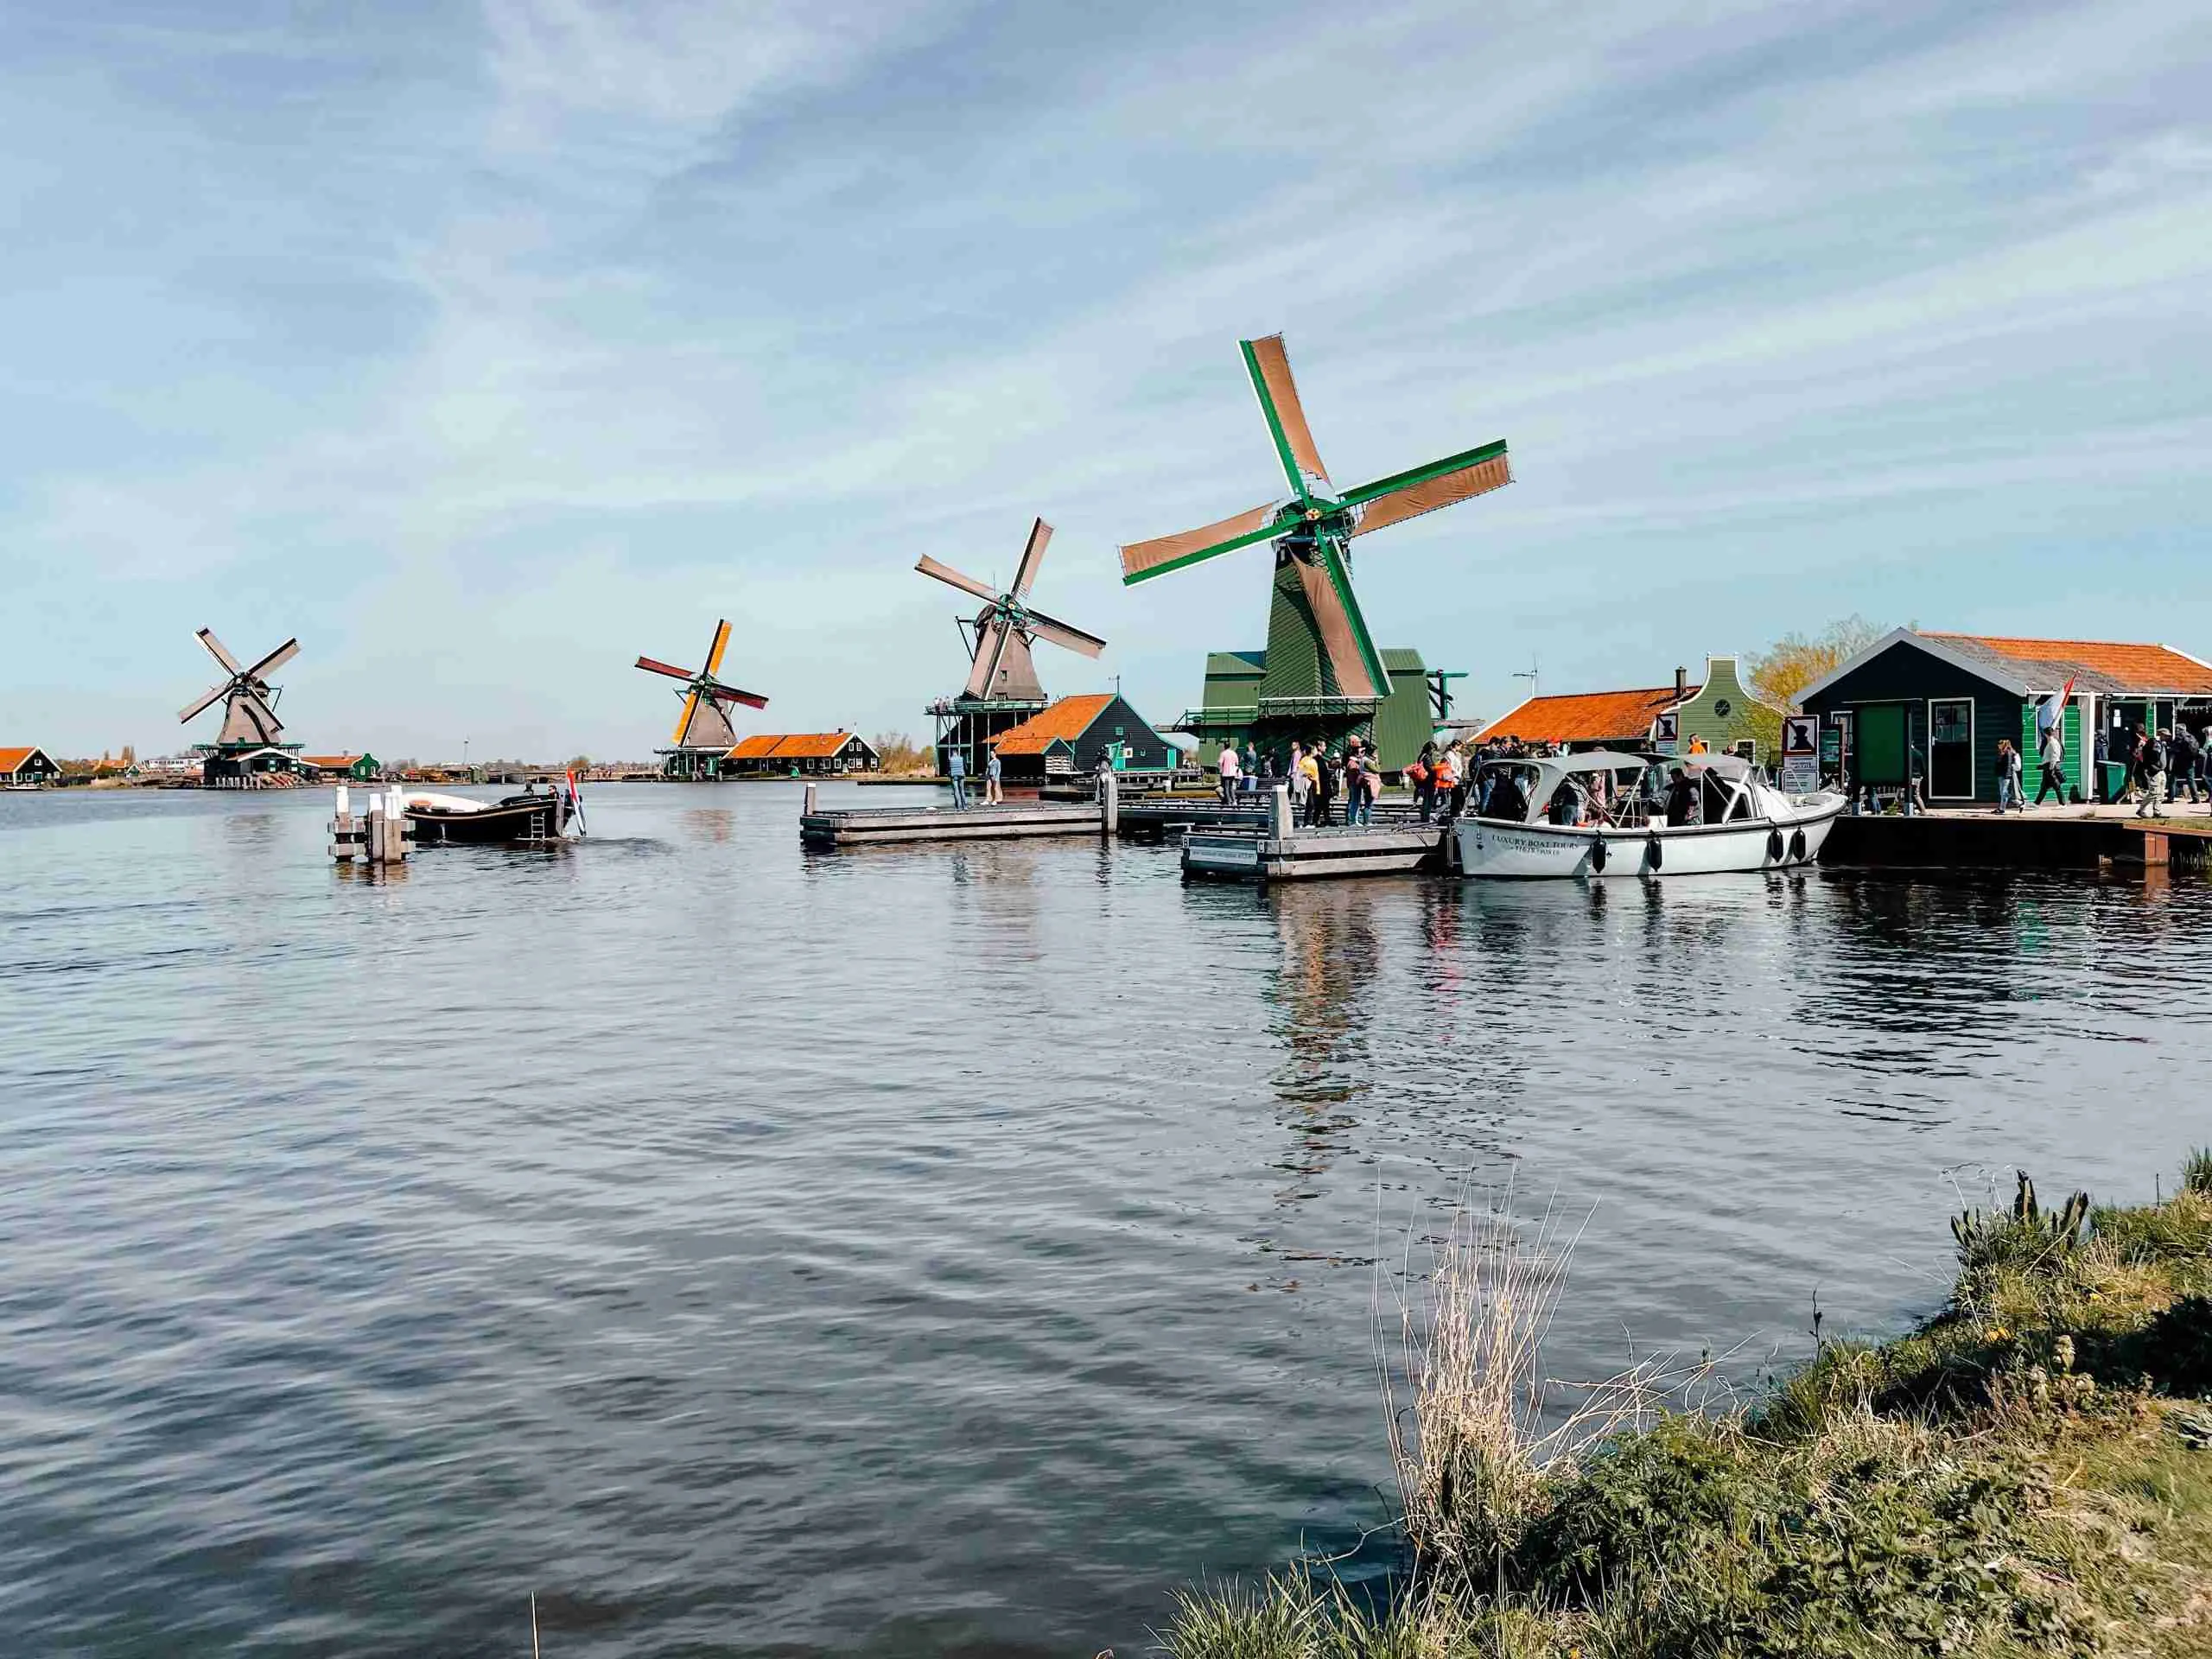 Some of the windmills that can be found along the river at Zaanse Schans